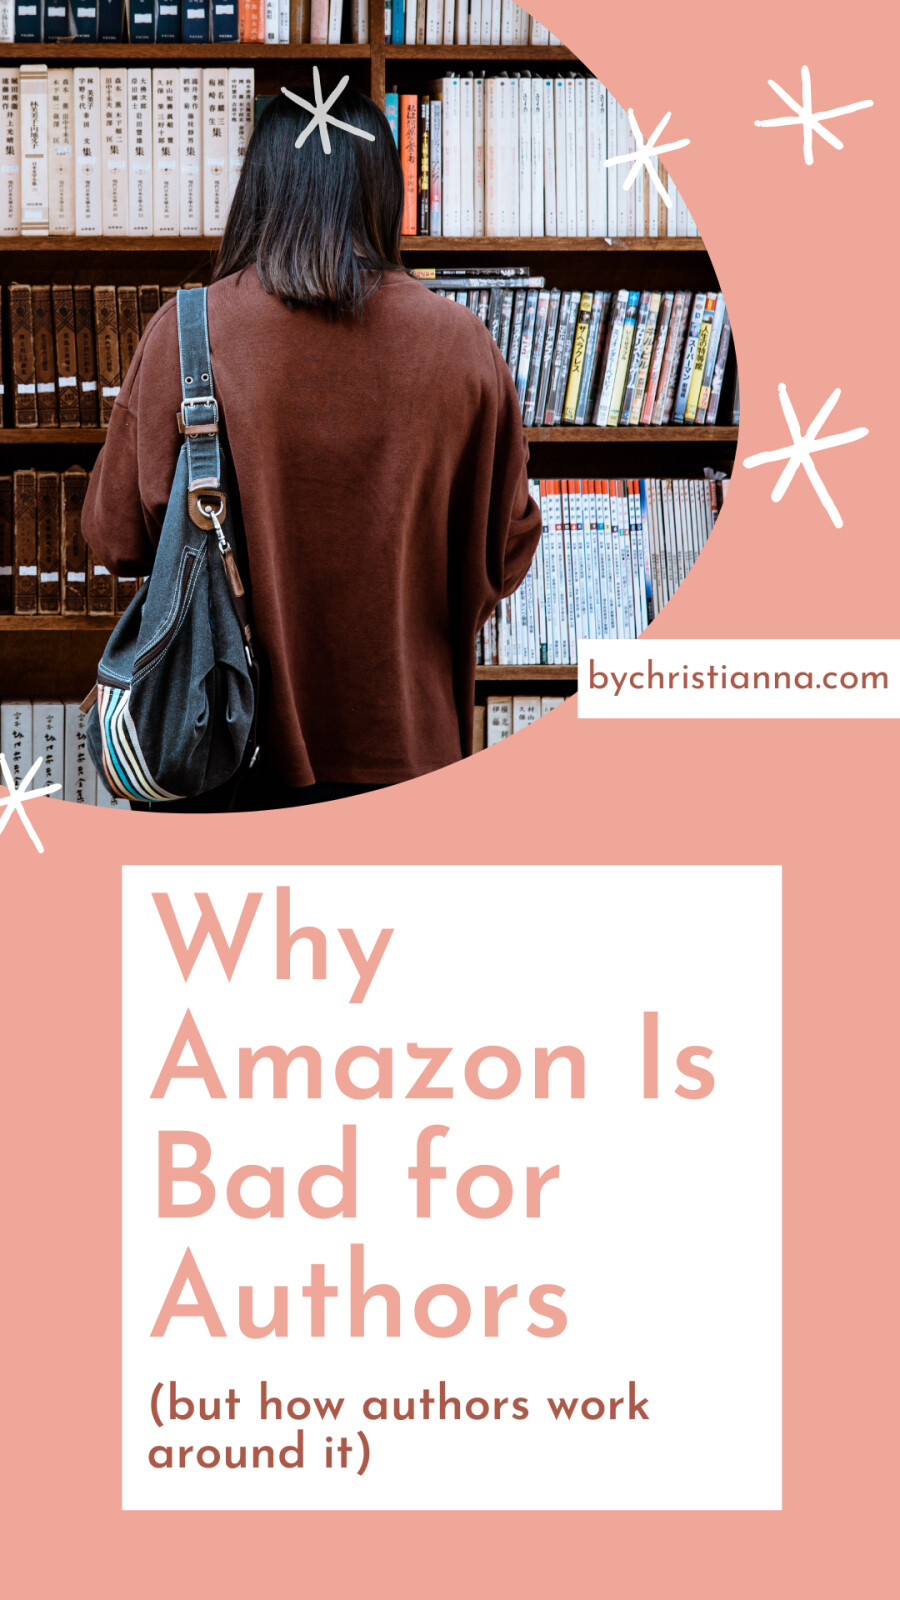 Why Amazon Is Bad for Authors but Authors Work Around It